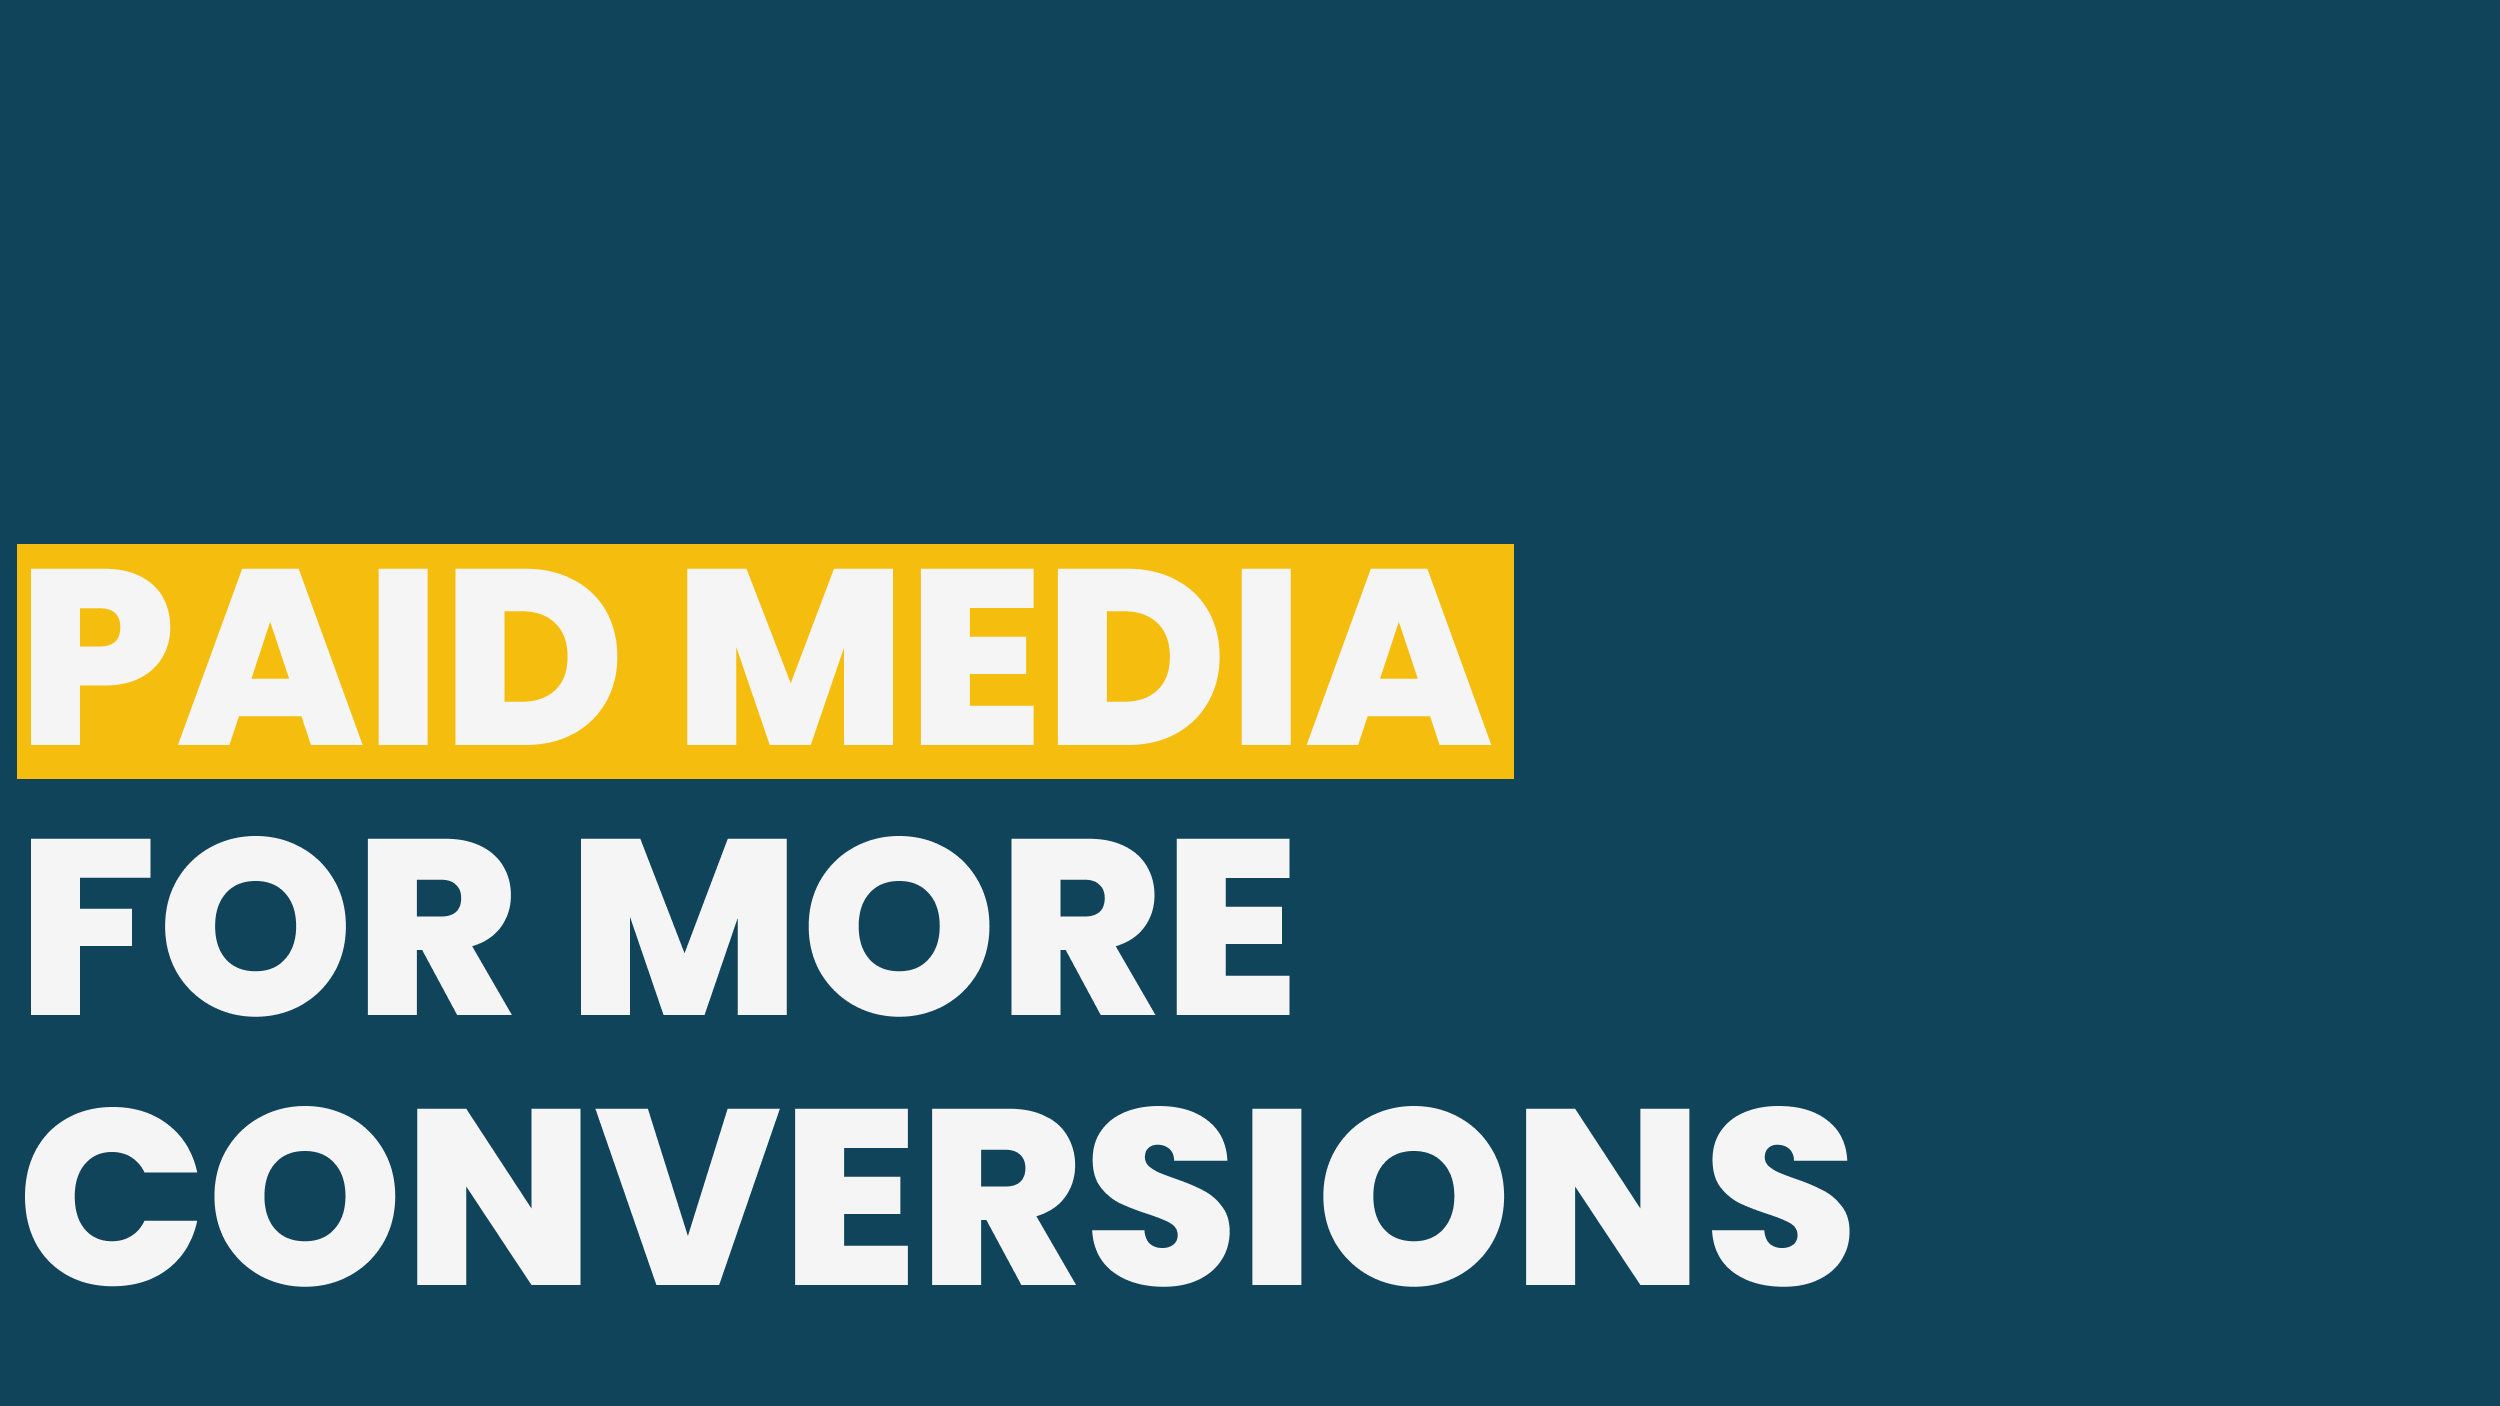 PAID MEDIA FOR MORE CONVERSIONS